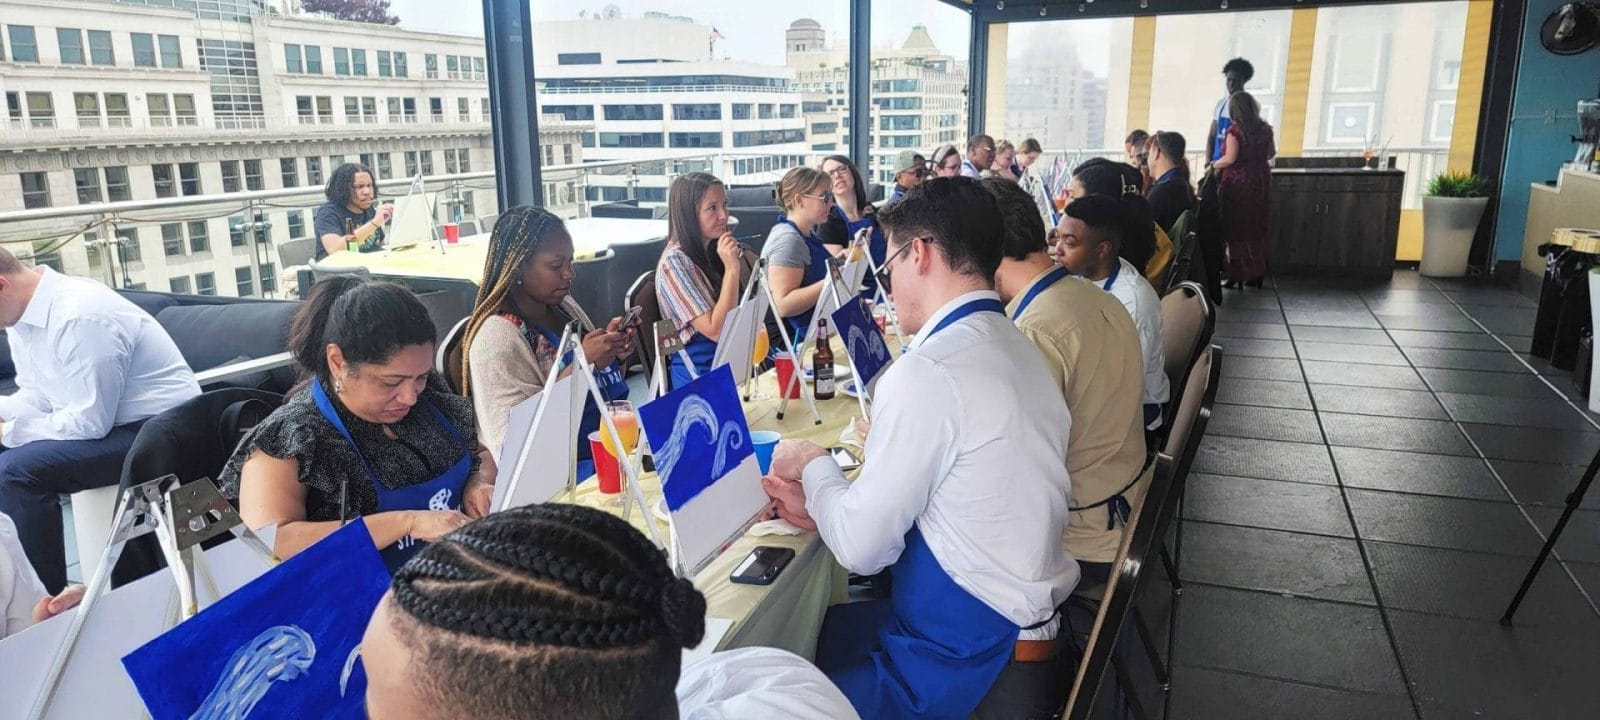 A group of people participating in a paint and sip event in Washington DC.